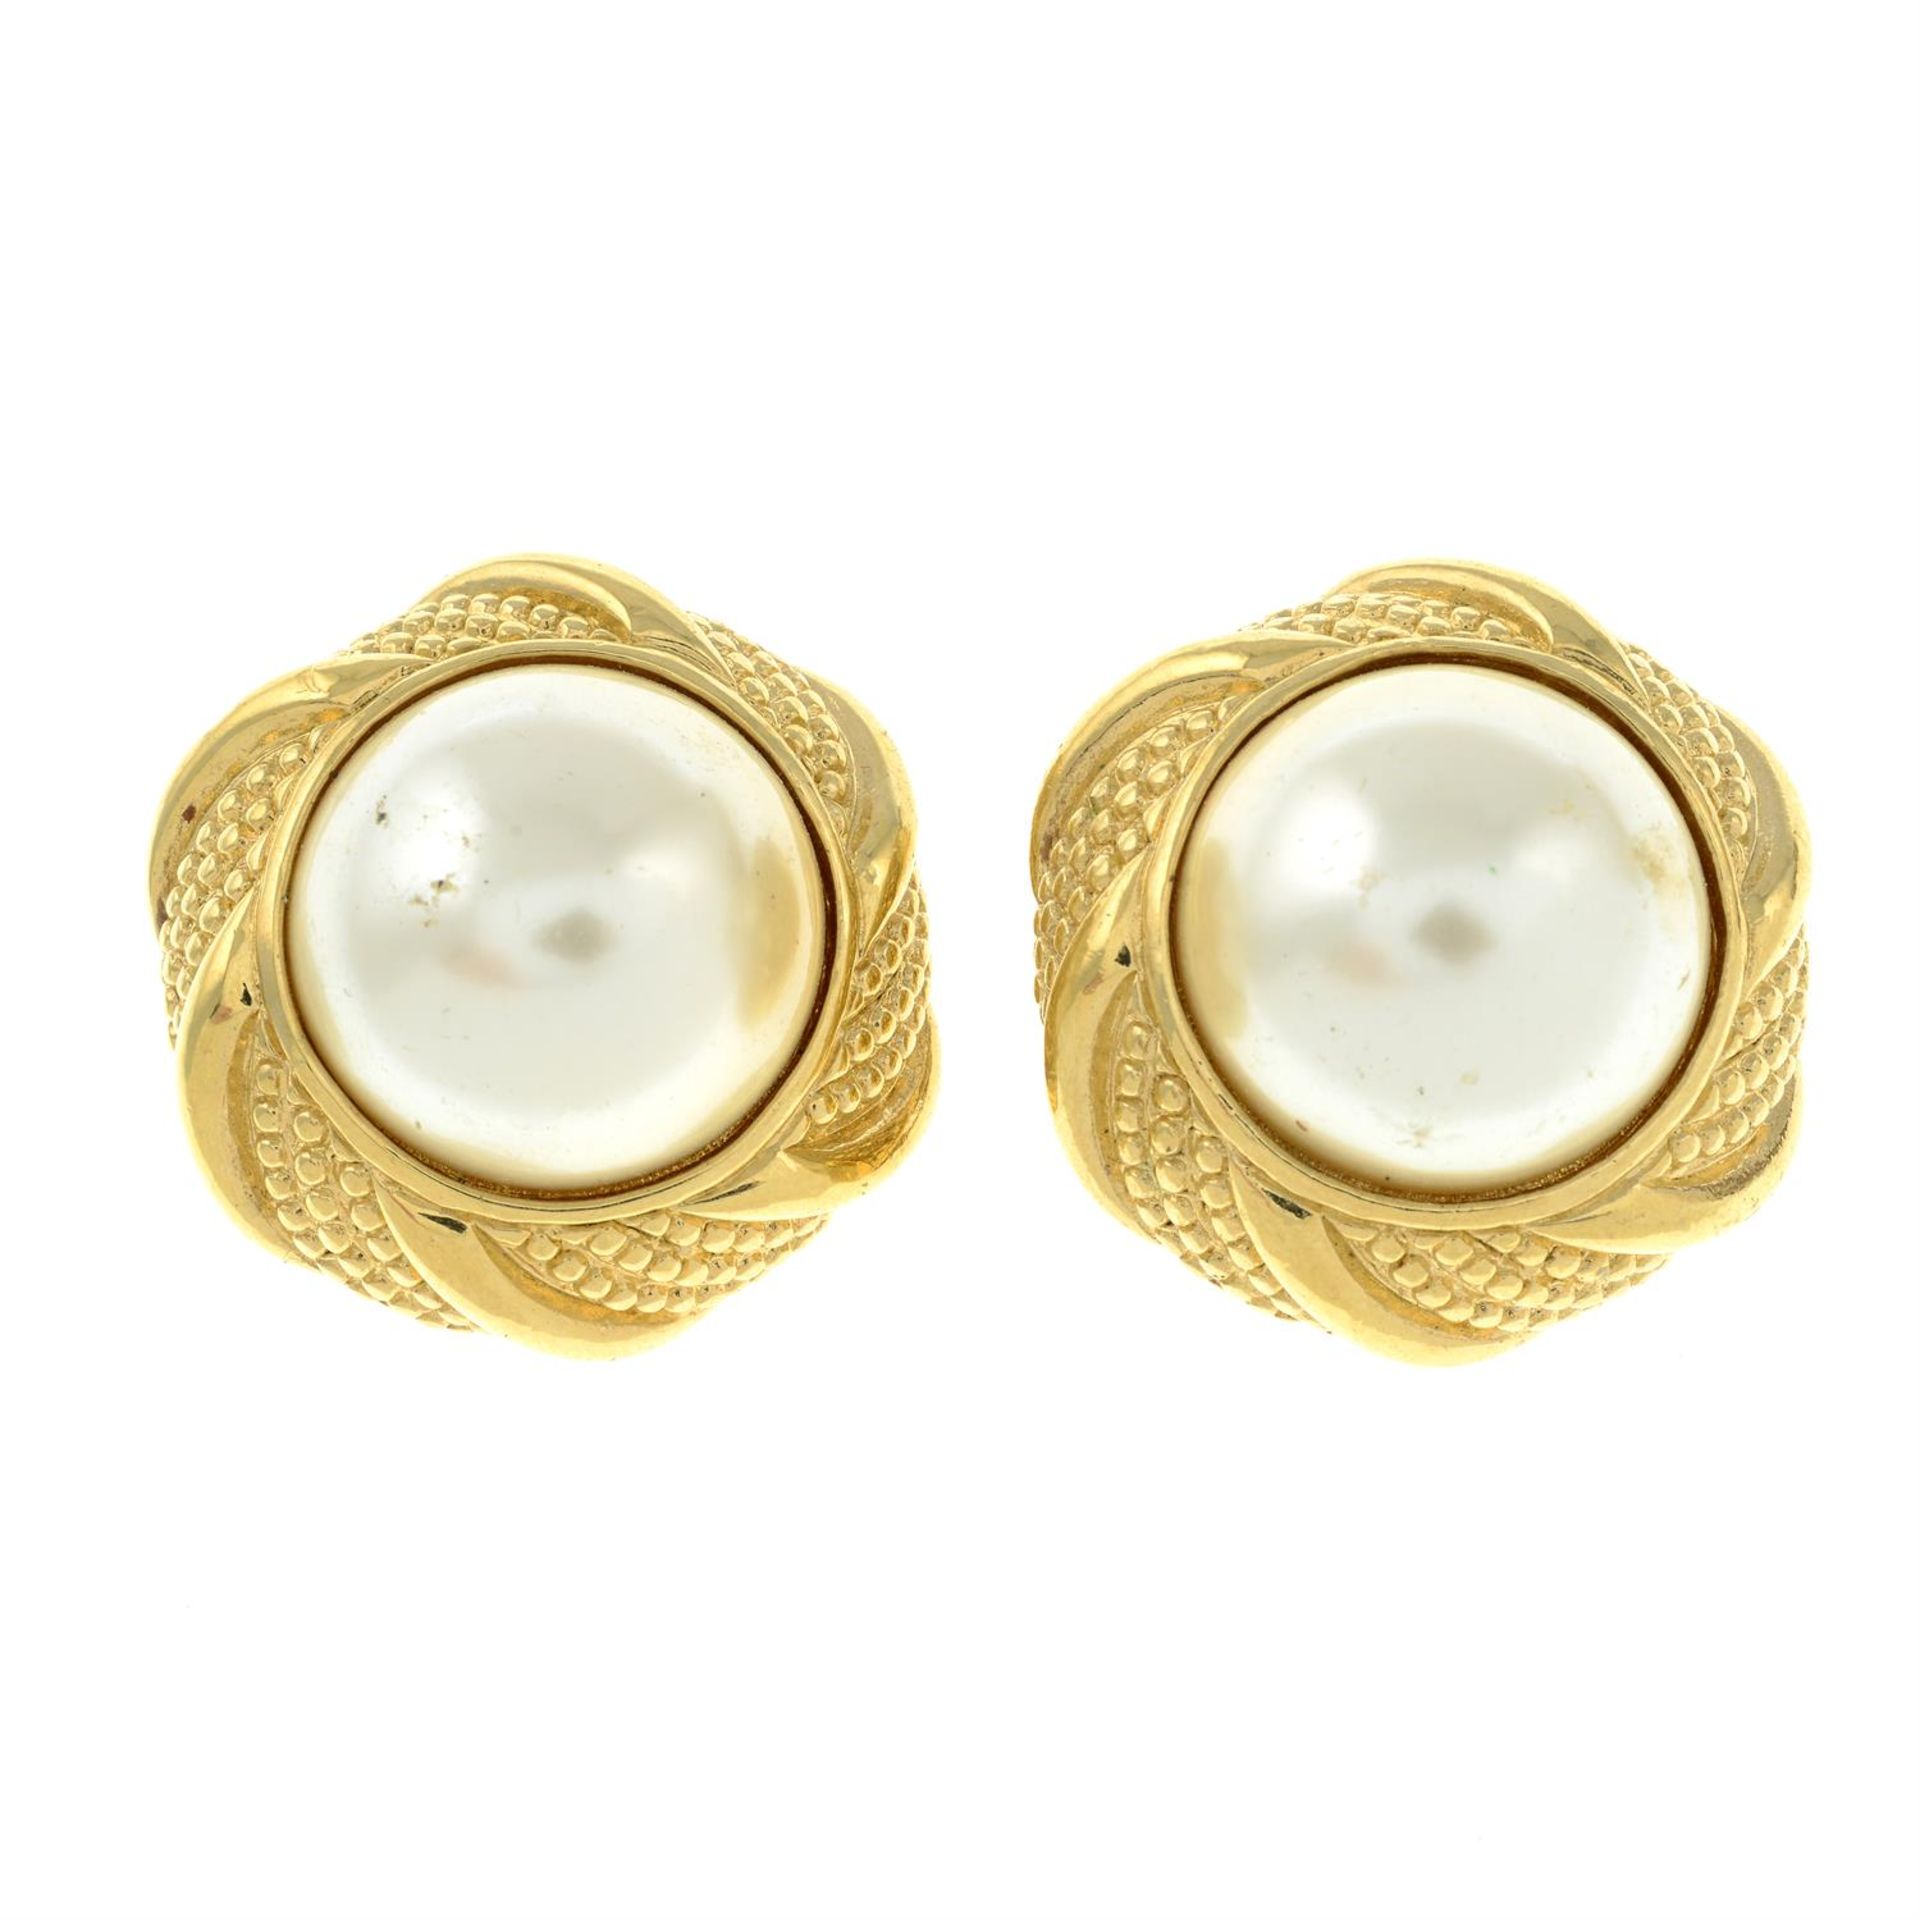 CHRISTIAN DIOR - a pair of imitation pearl clip-on earrings.